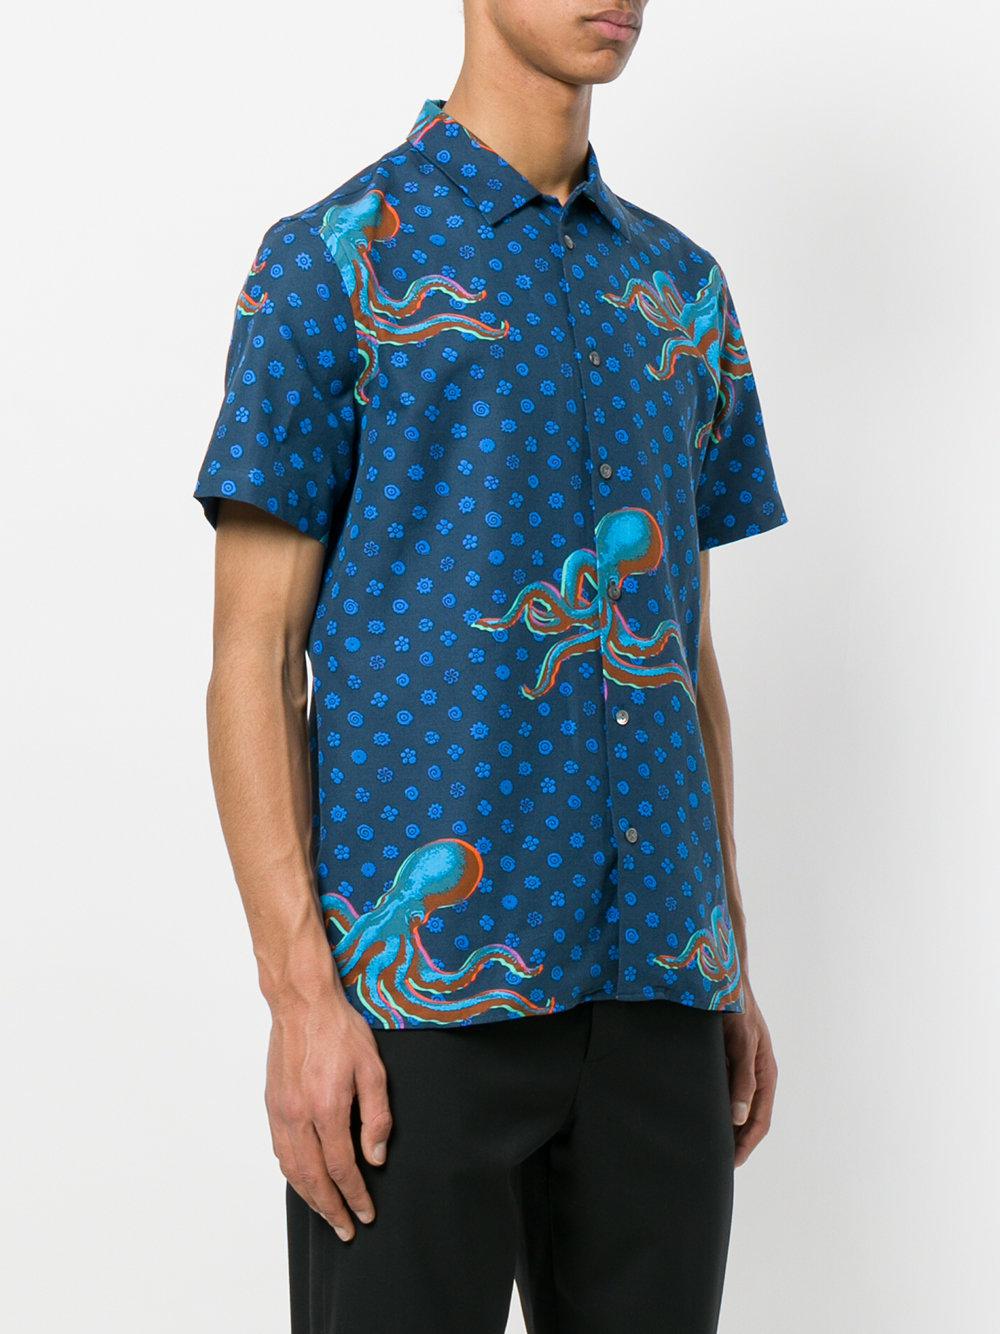 PS by Paul Smith Cotton Octopus Print Short Sleeve Shirt in Brown for Men -  Lyst